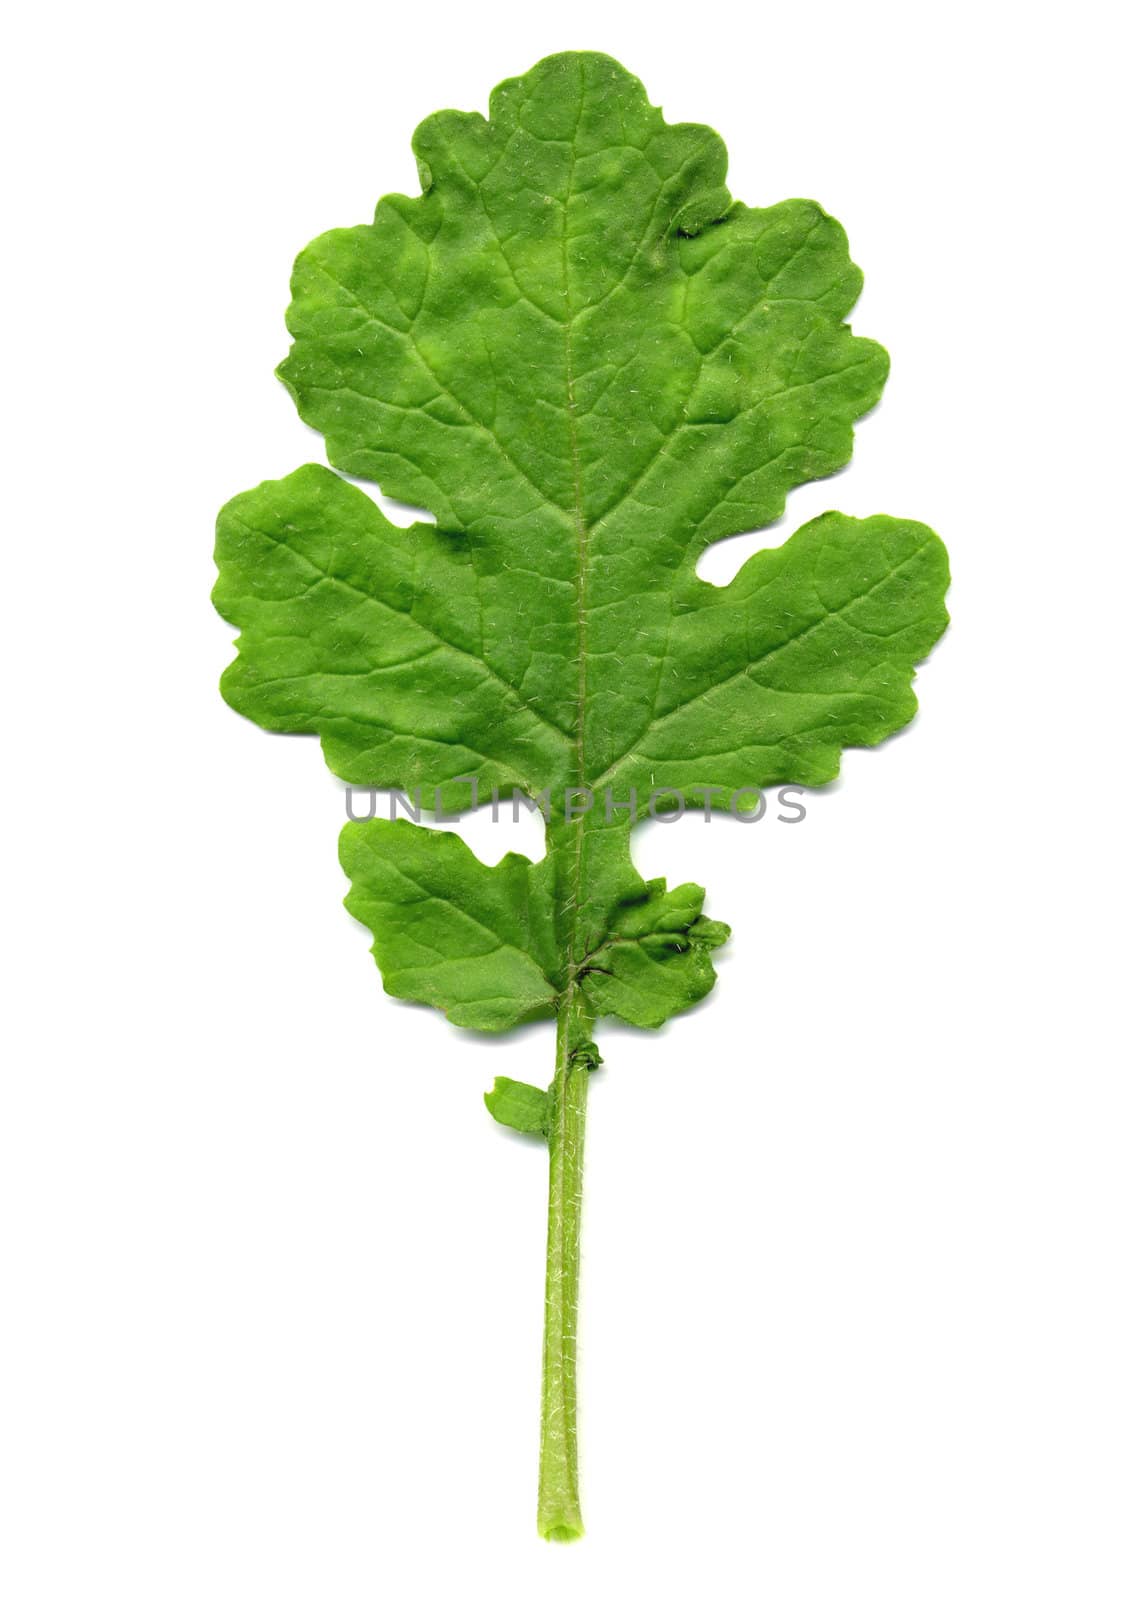 Edible leaf of Mustard plant isolated over white background